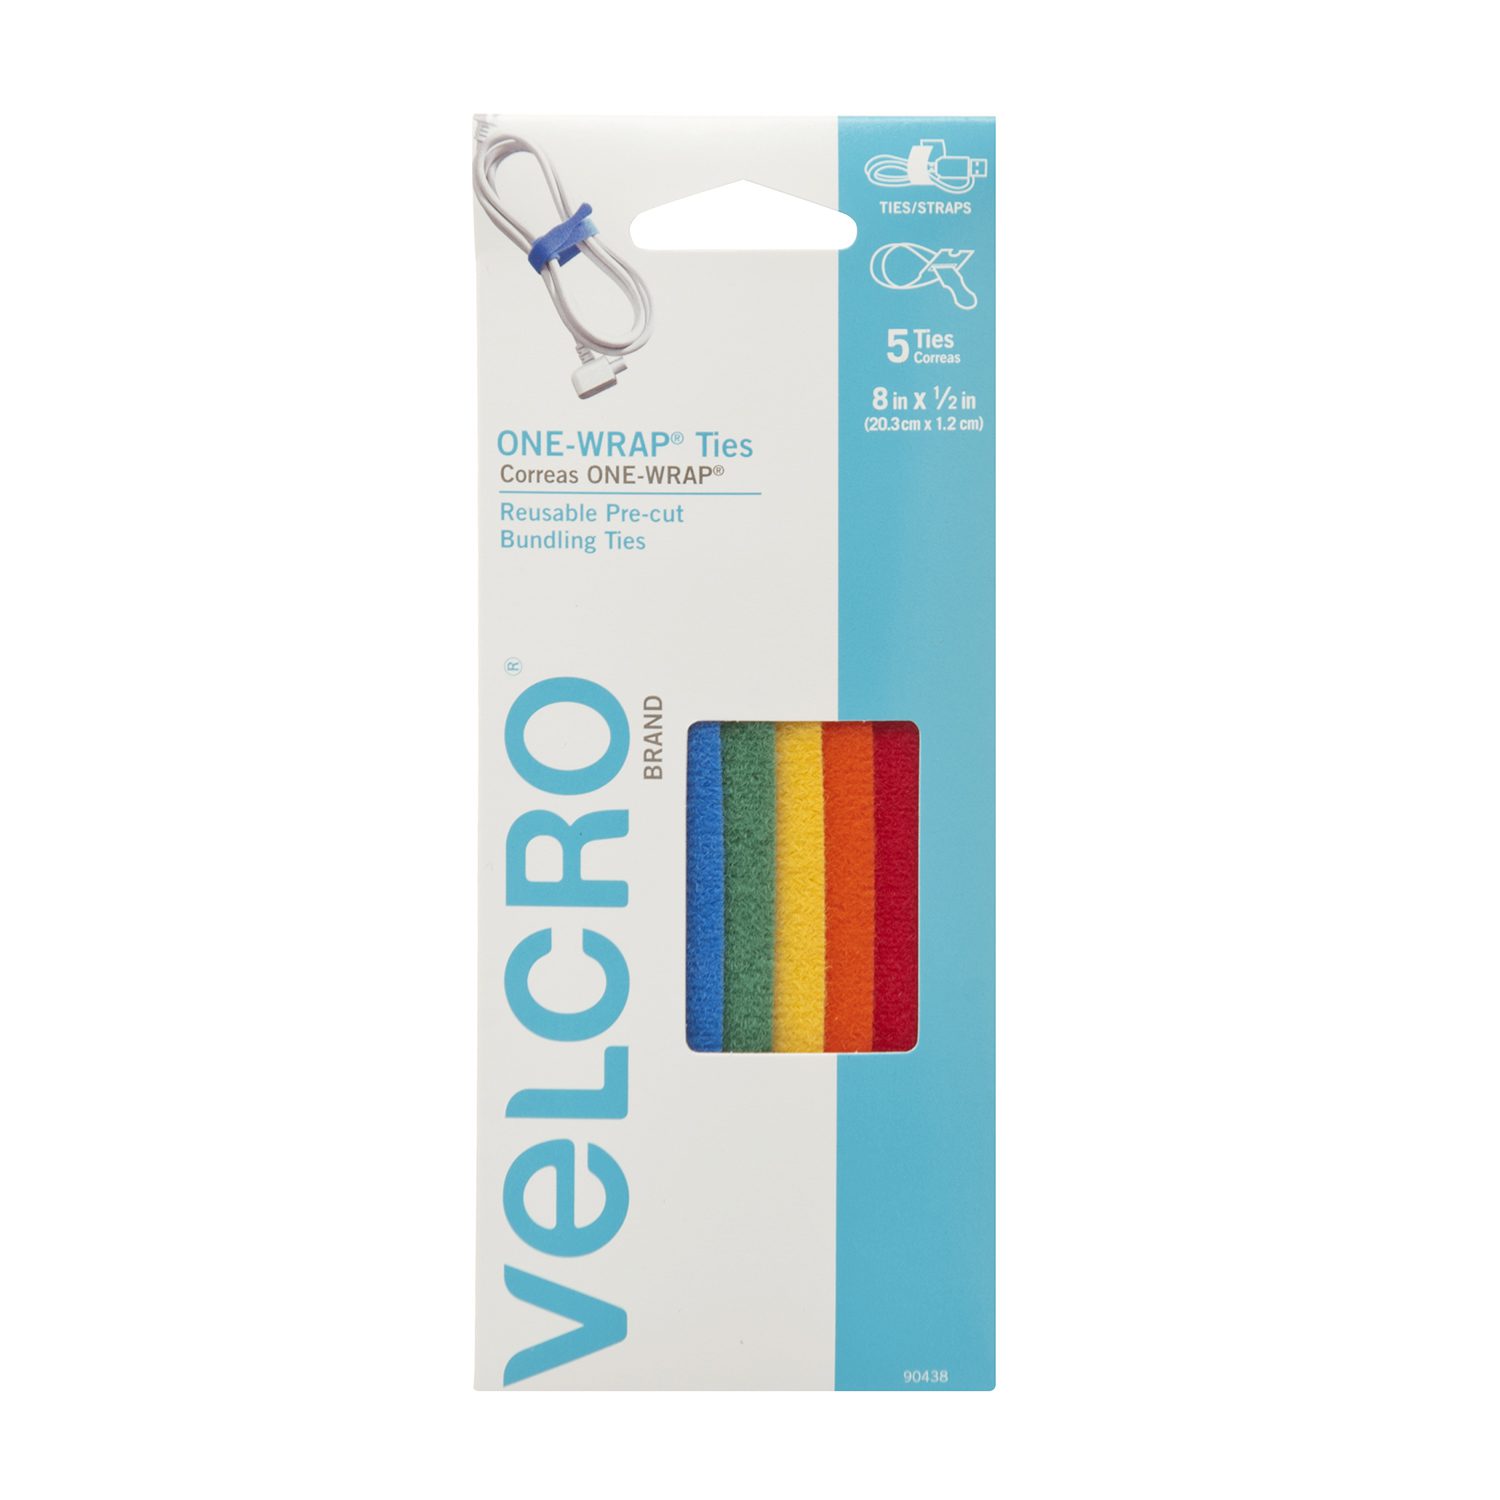 Heavy Duty VELCRO Brand Wires & Cords 60 Ct ONE-WRAP for Cables 8 x 1/2 Ties Reusable - Multi-Color